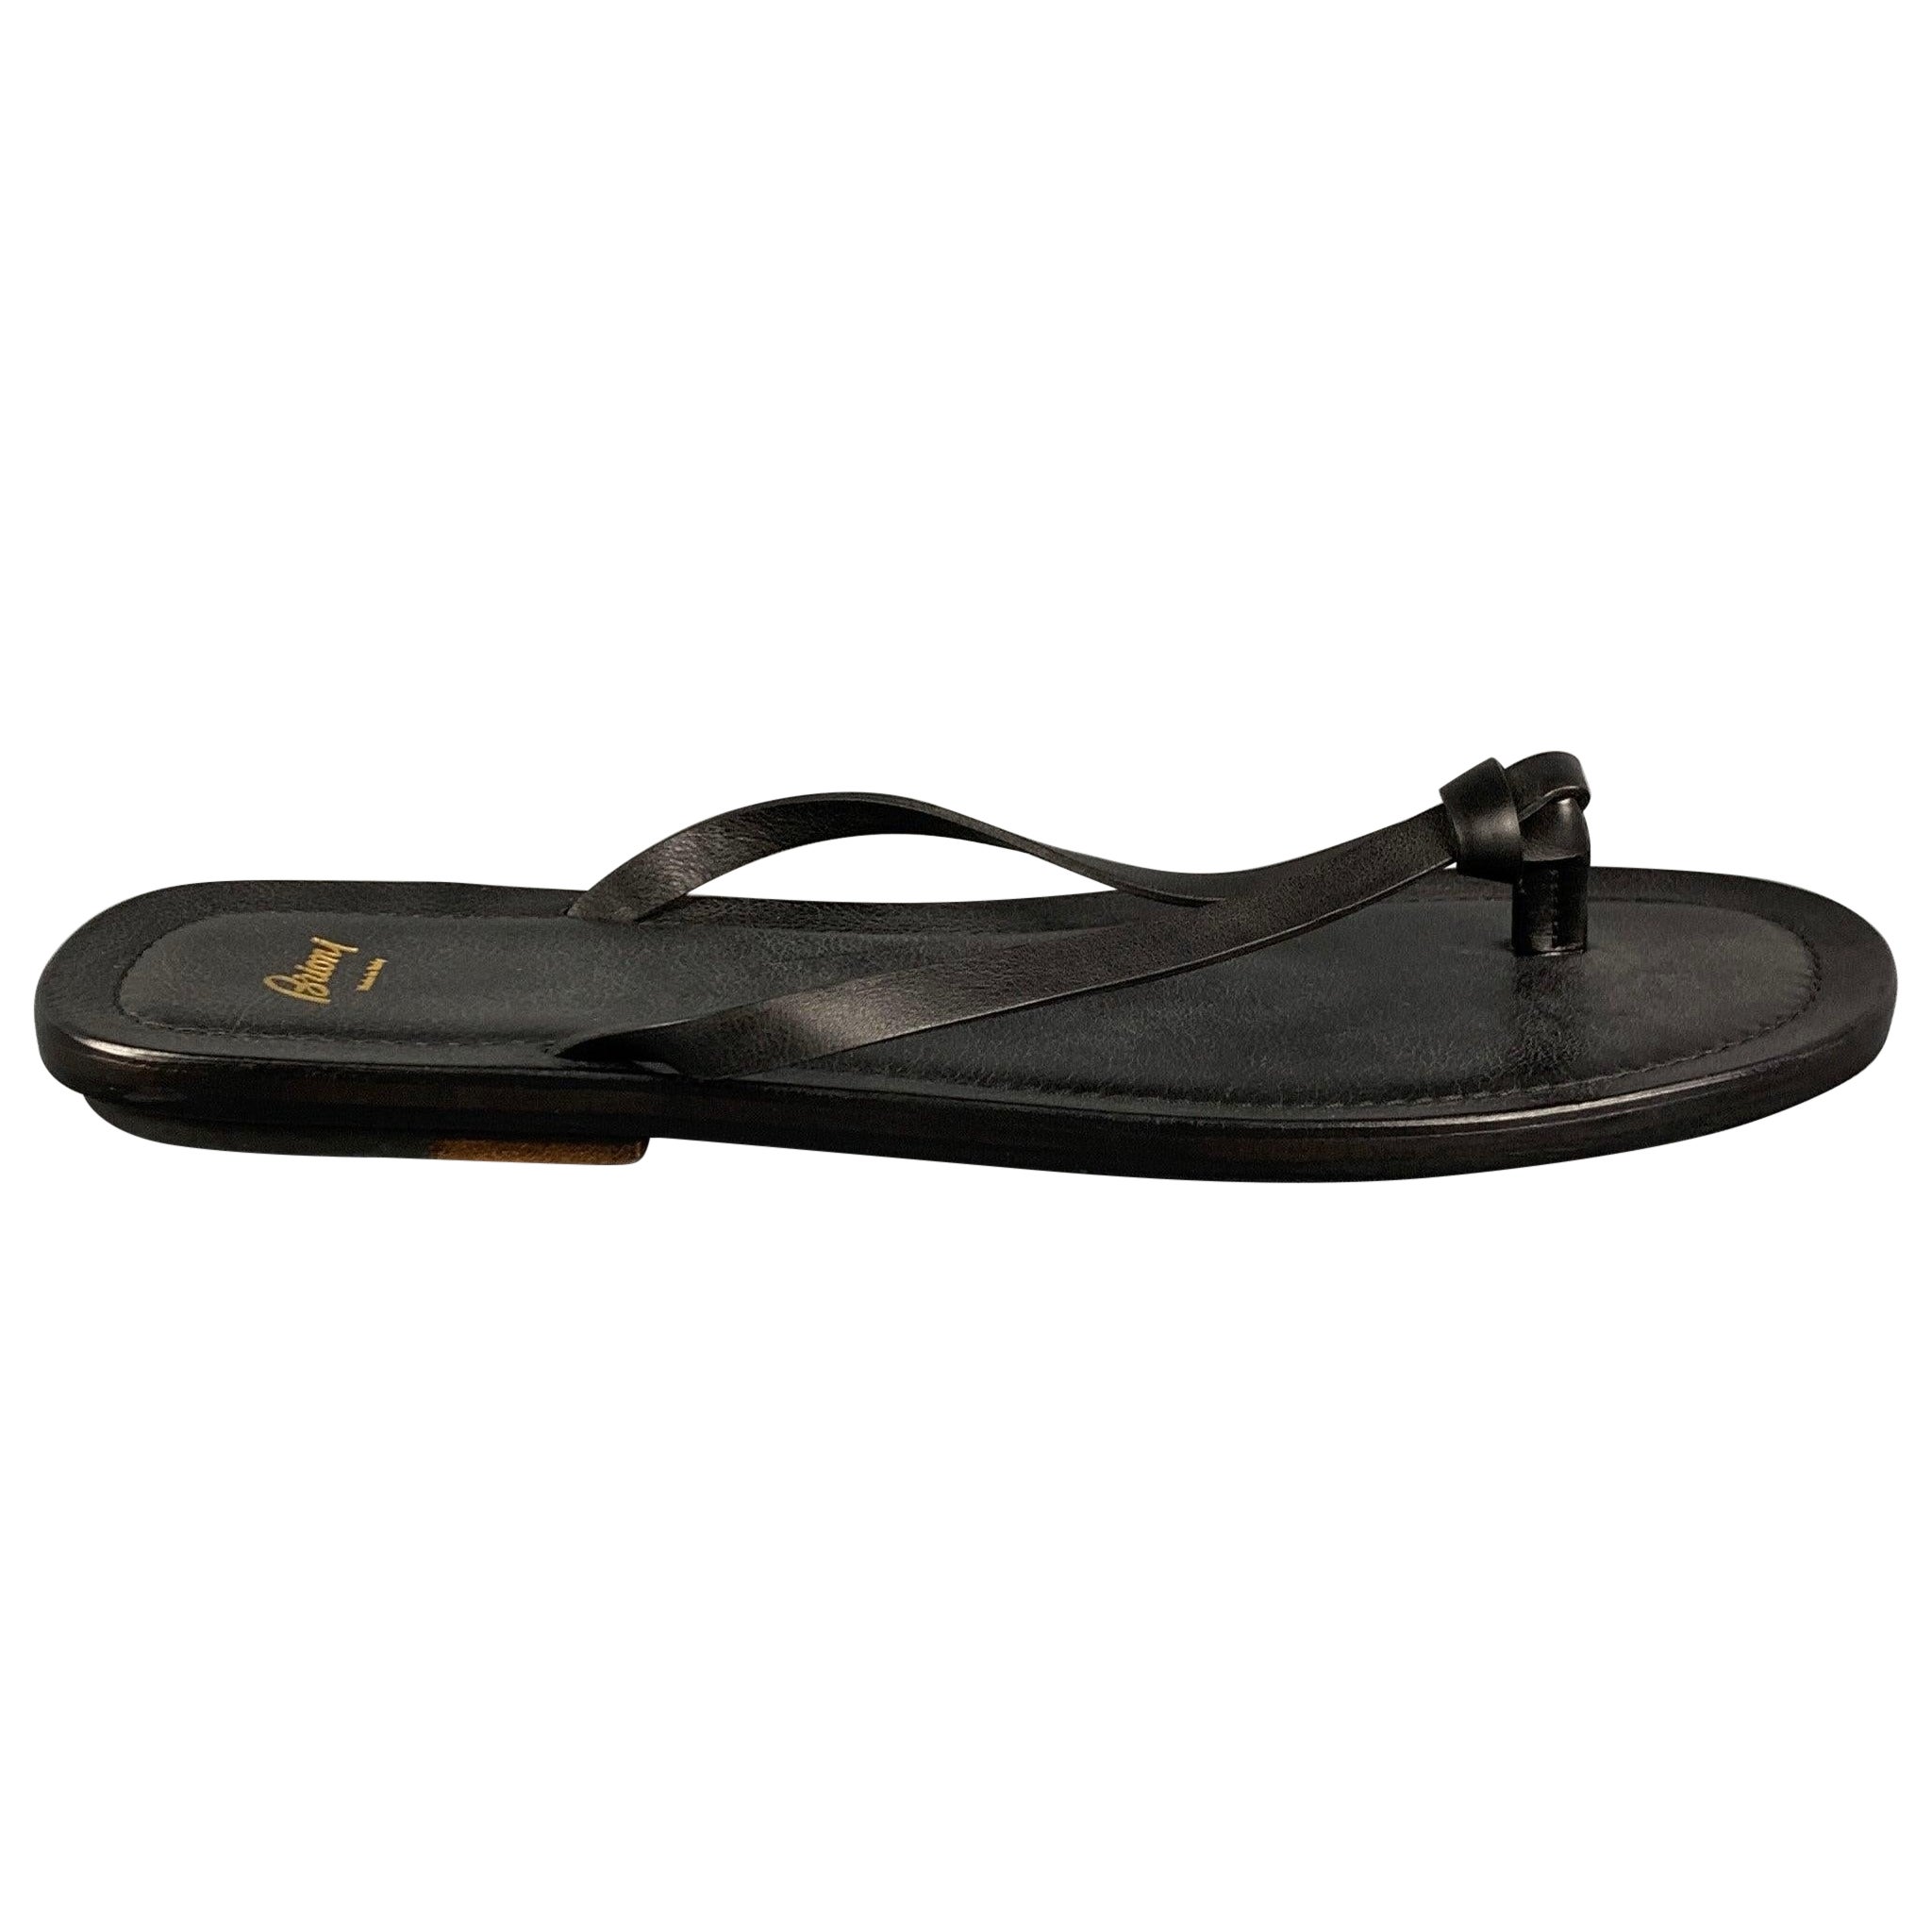 BRIONI Size 13 Black Leather Thong Sandals